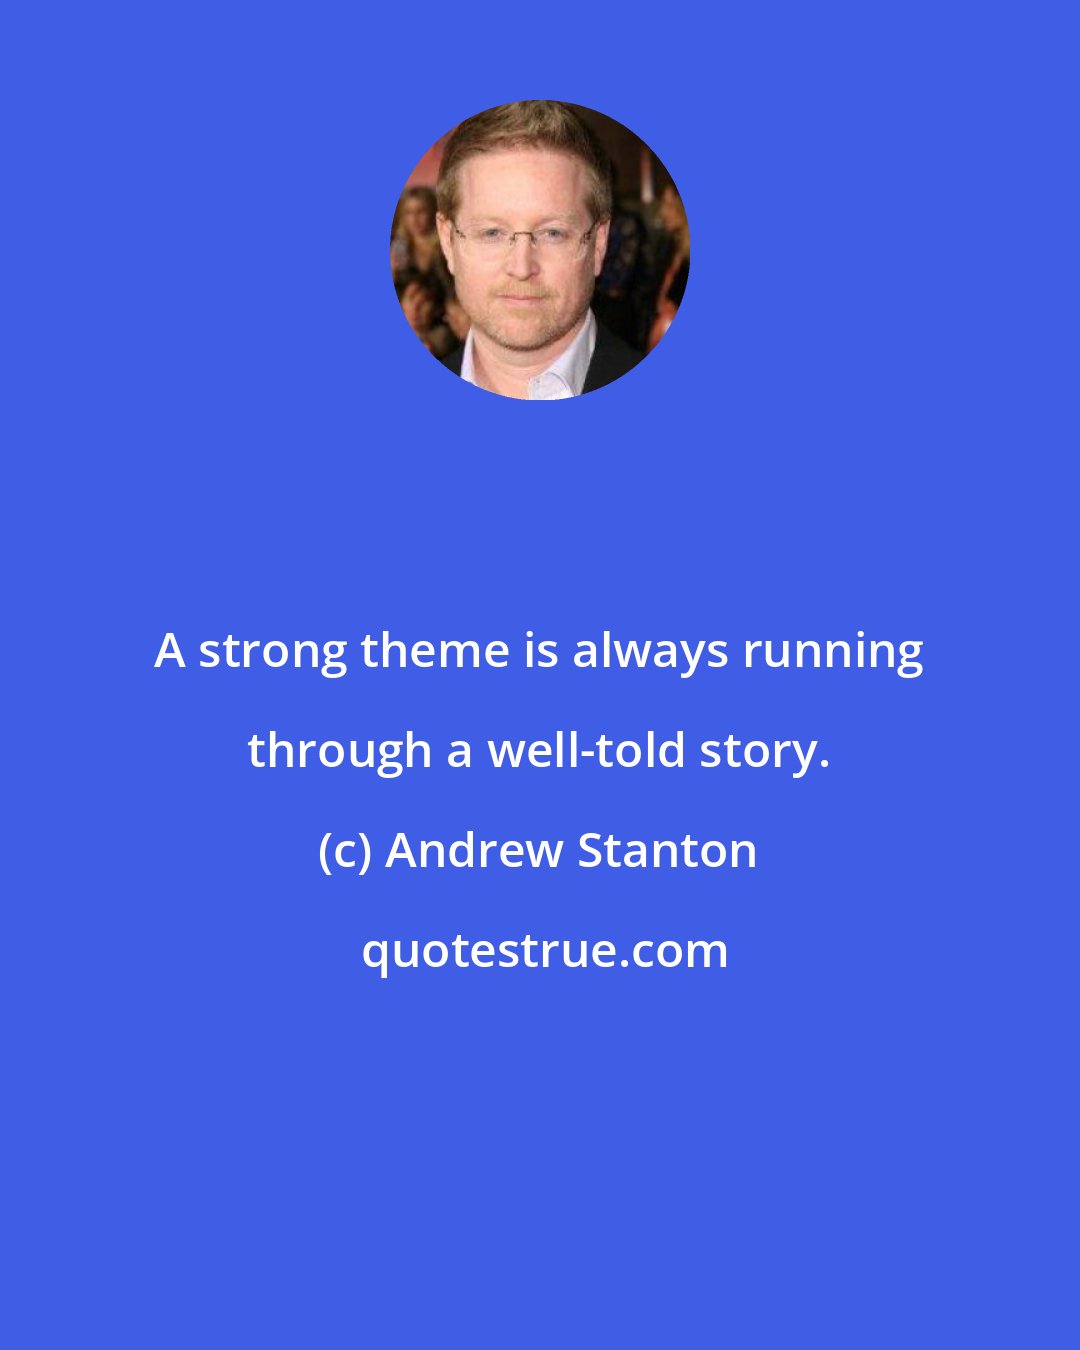 Andrew Stanton: A strong theme is always running through a well-told story.